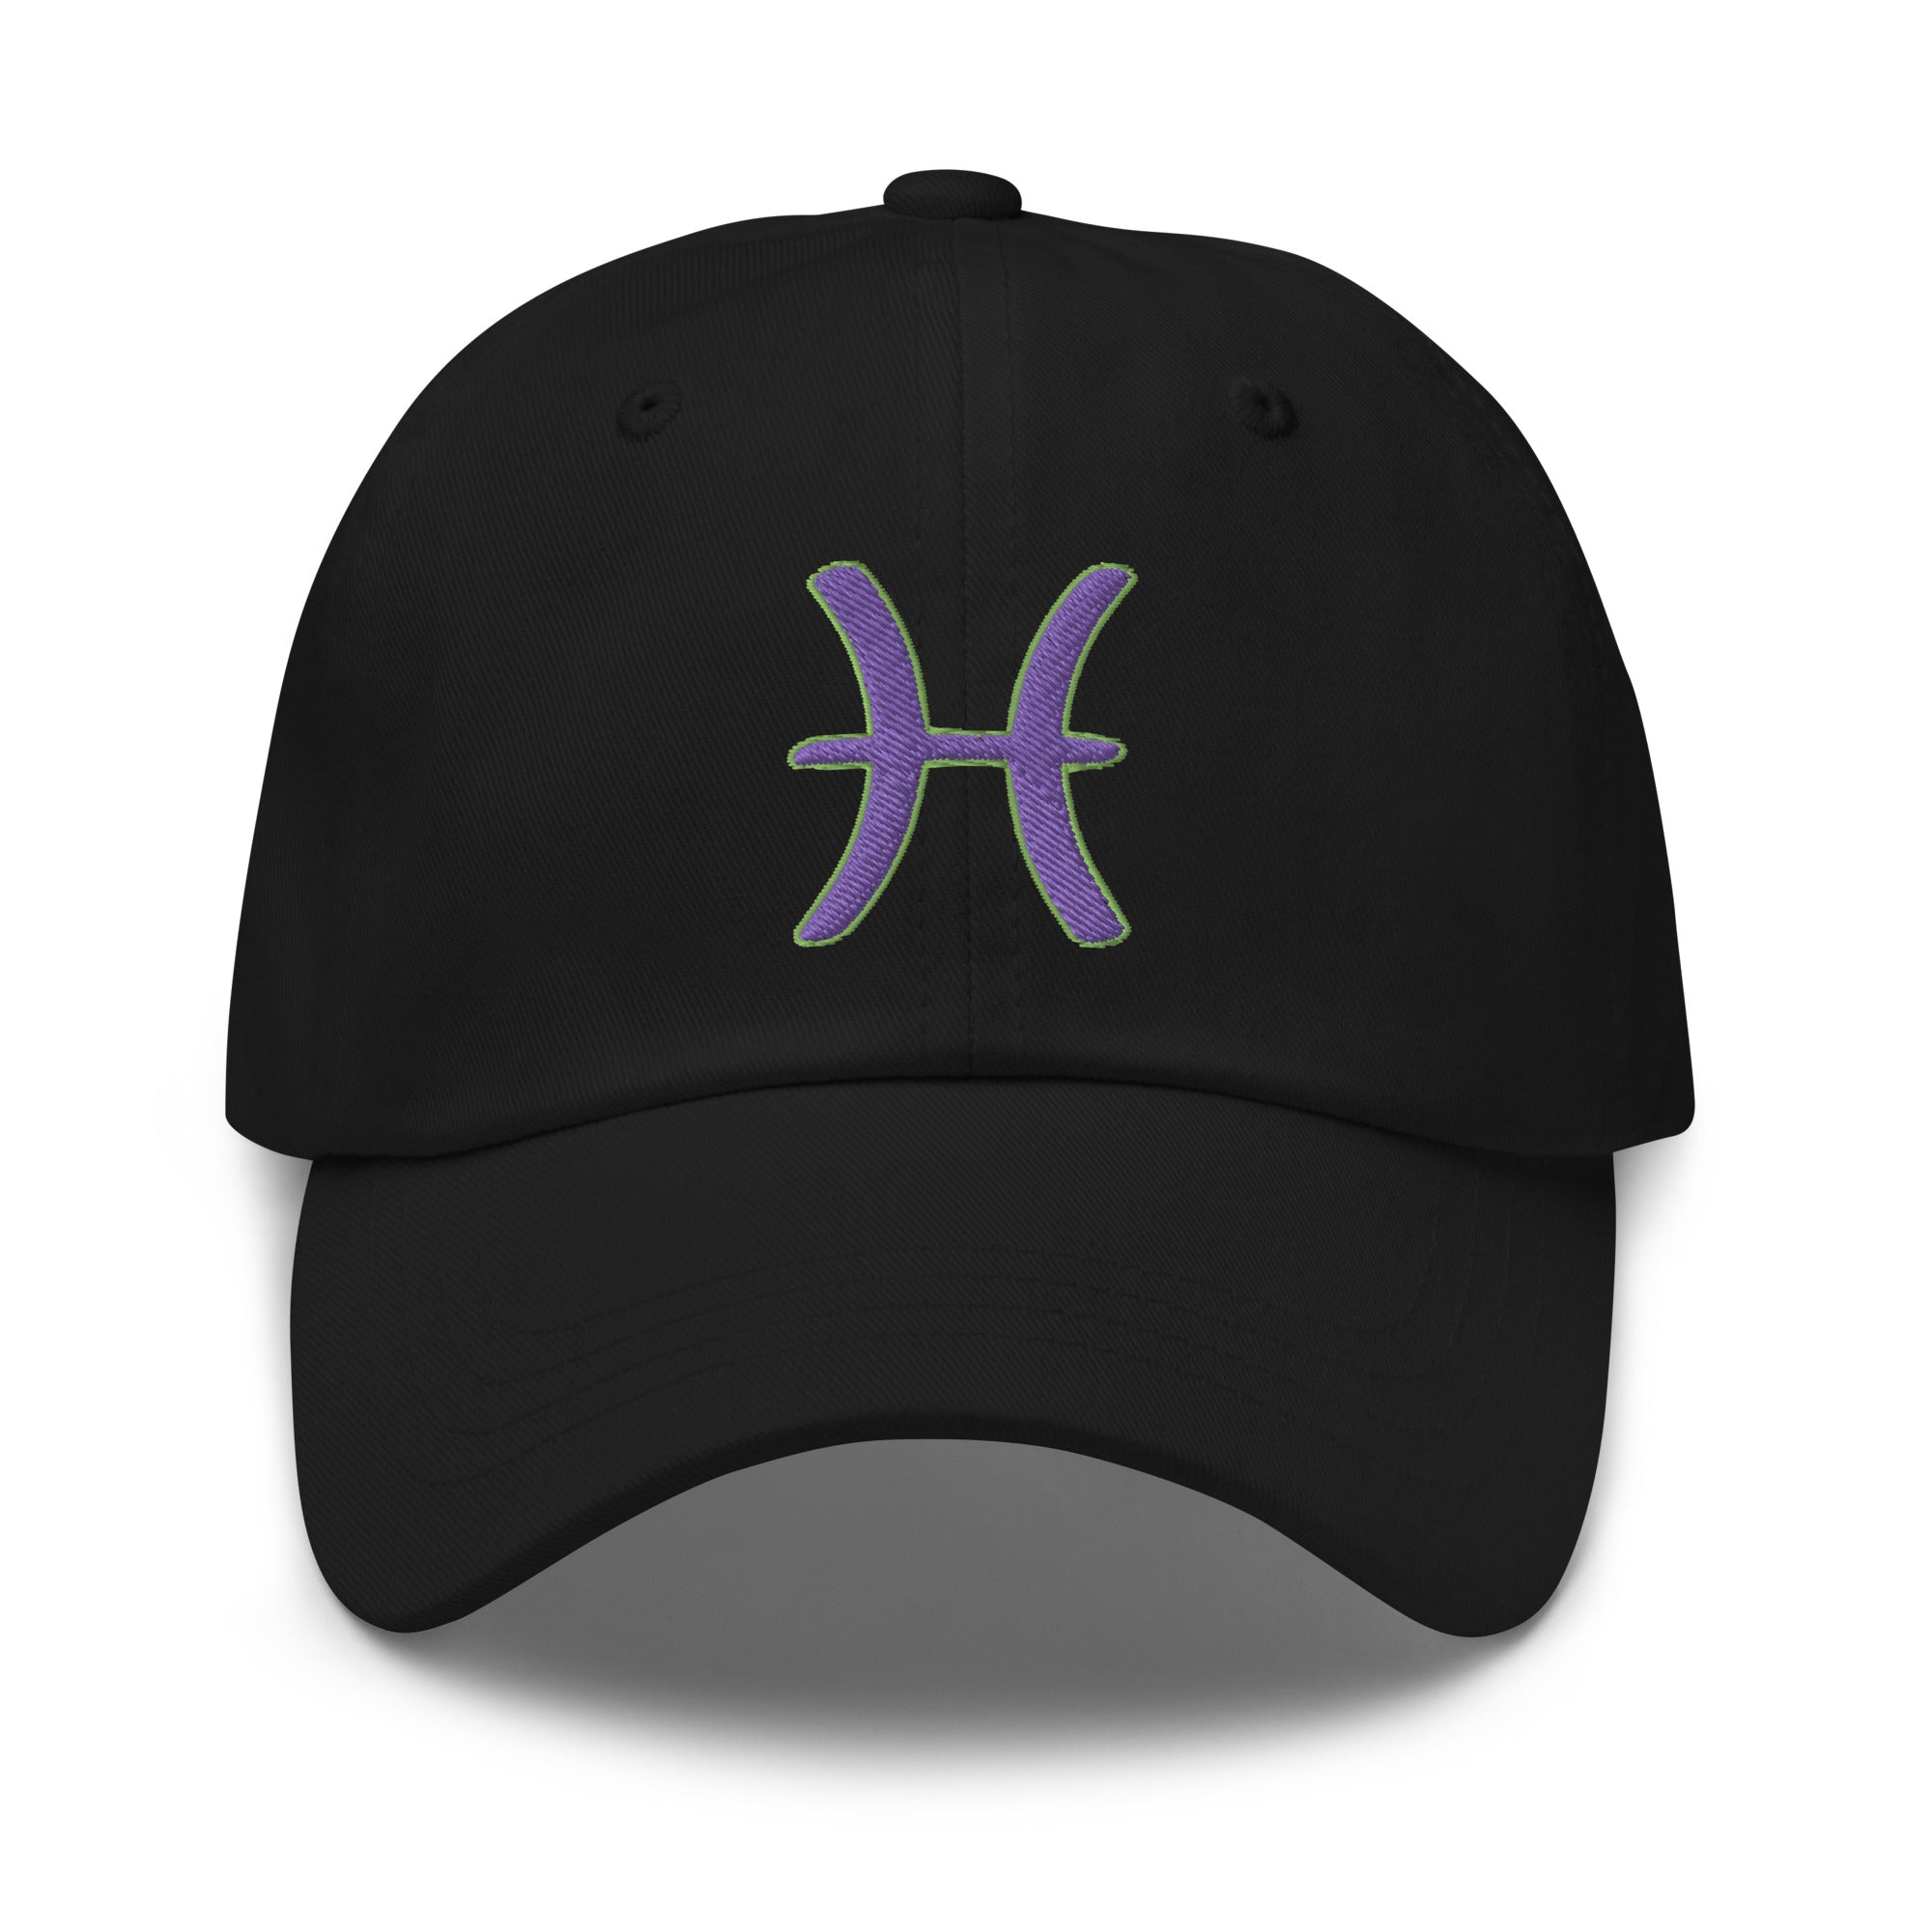 Zodiac Sign Pisces Embroidered Baseball Cap Astrology Horoscope Dad hat - Edge of Life Designs